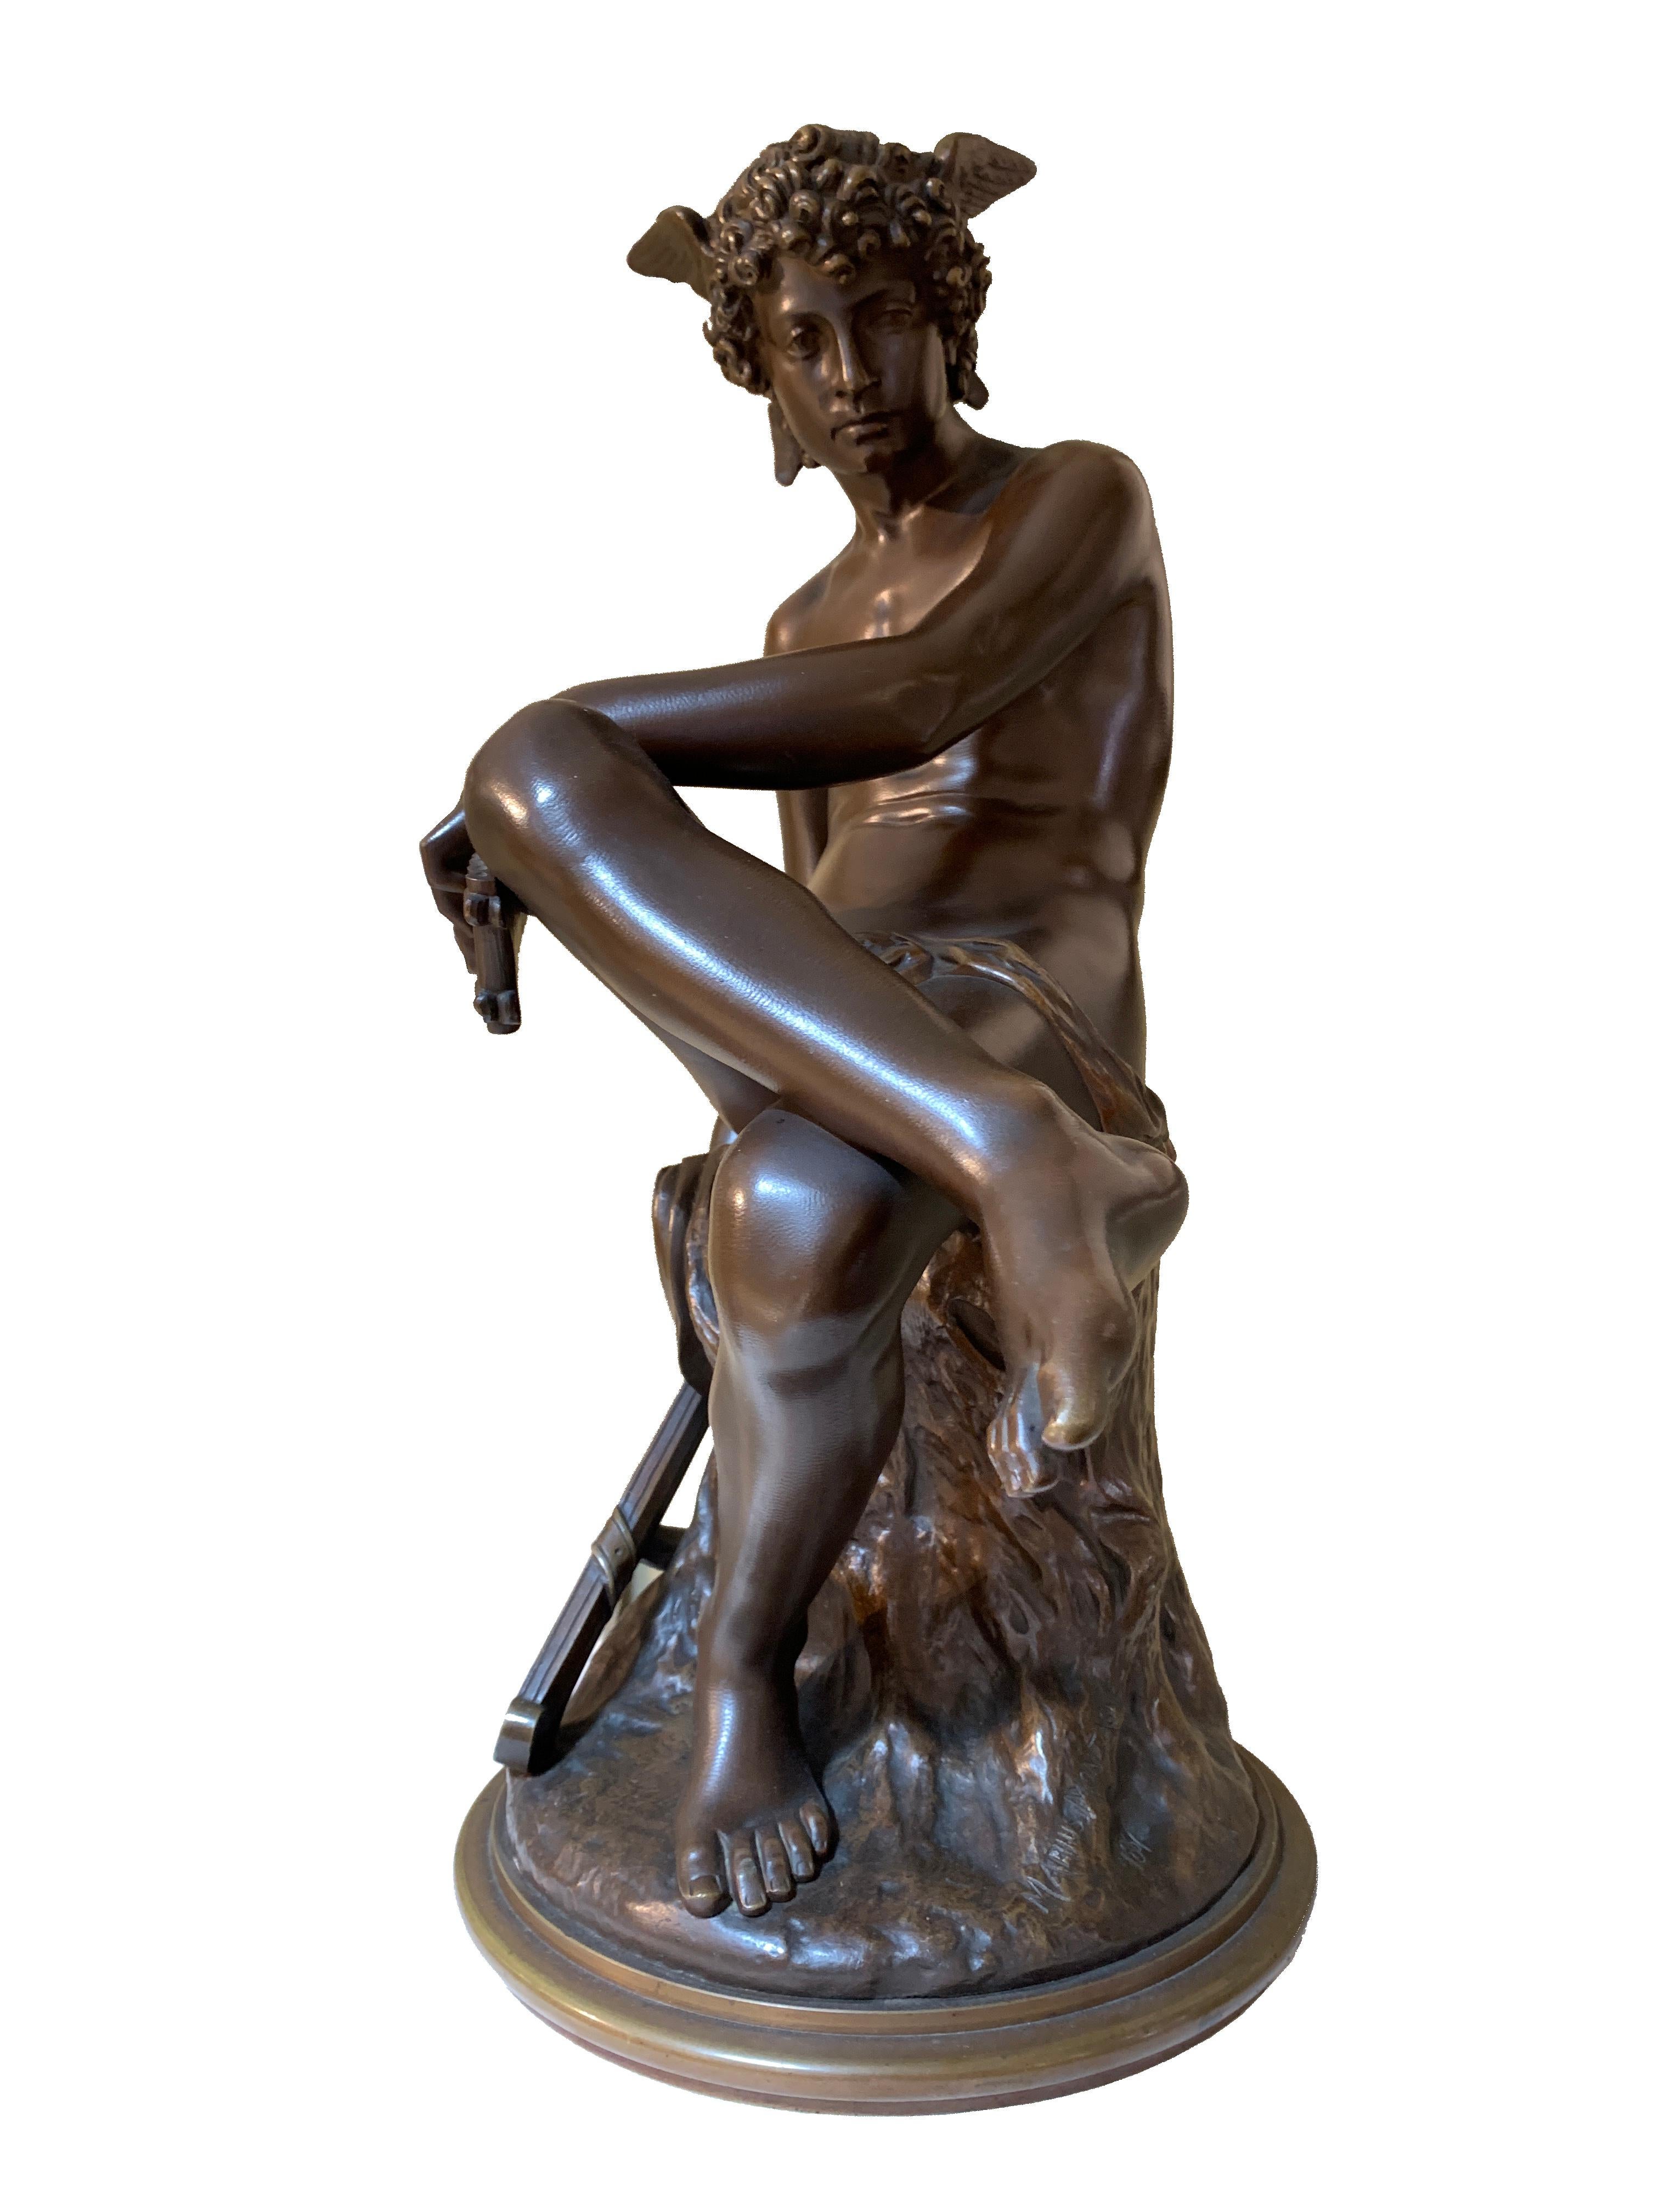 France
Marius Montagne (1828-1879)
Dated 1867

A fine and detailed solid bronze sculpture of a seated Hermes or Mercurius. His demeanor radiates peace. One hand holds his pan flute, the other his sword.
A wonderfulp detailed sculpture, which,